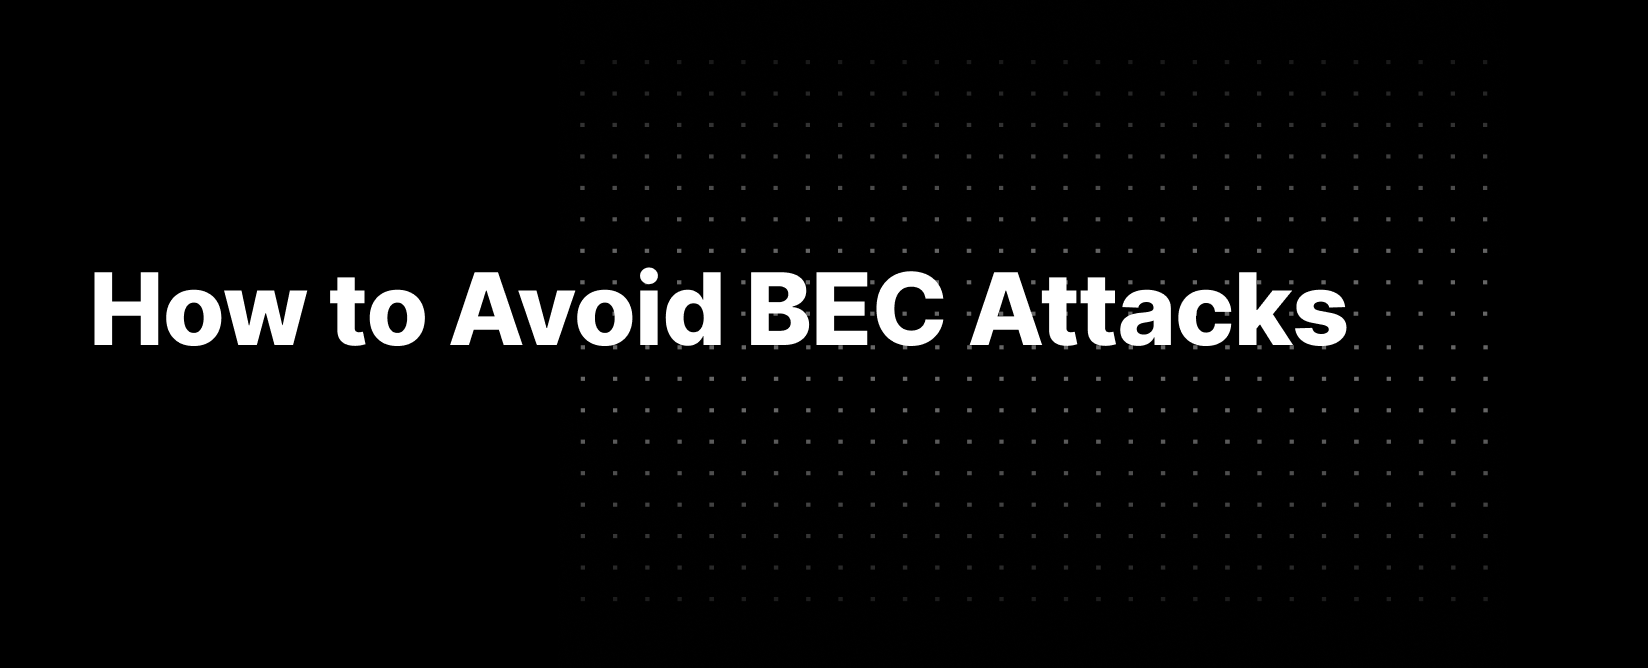 How to Avoid BEC Attacks - 1648x668 (1)